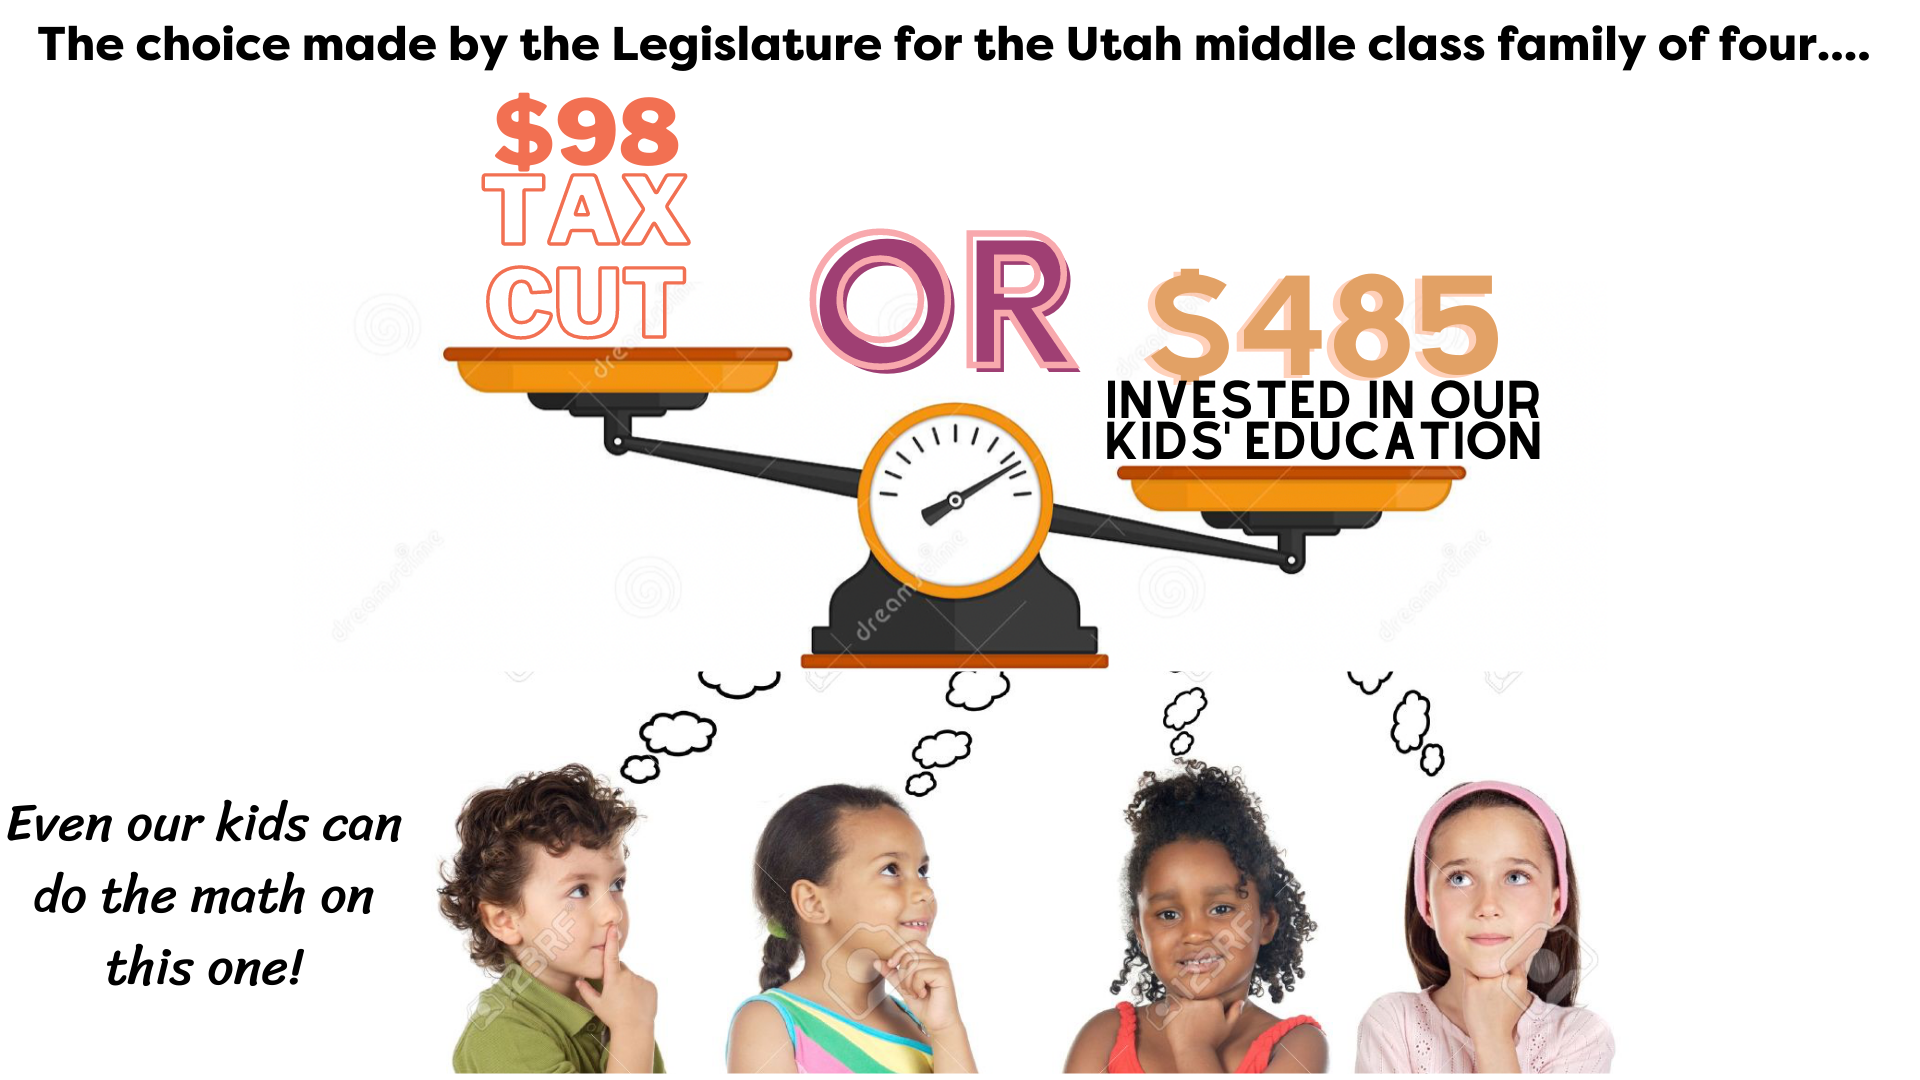 The choice made by UtLeg fo the Utah middle class family of 4png